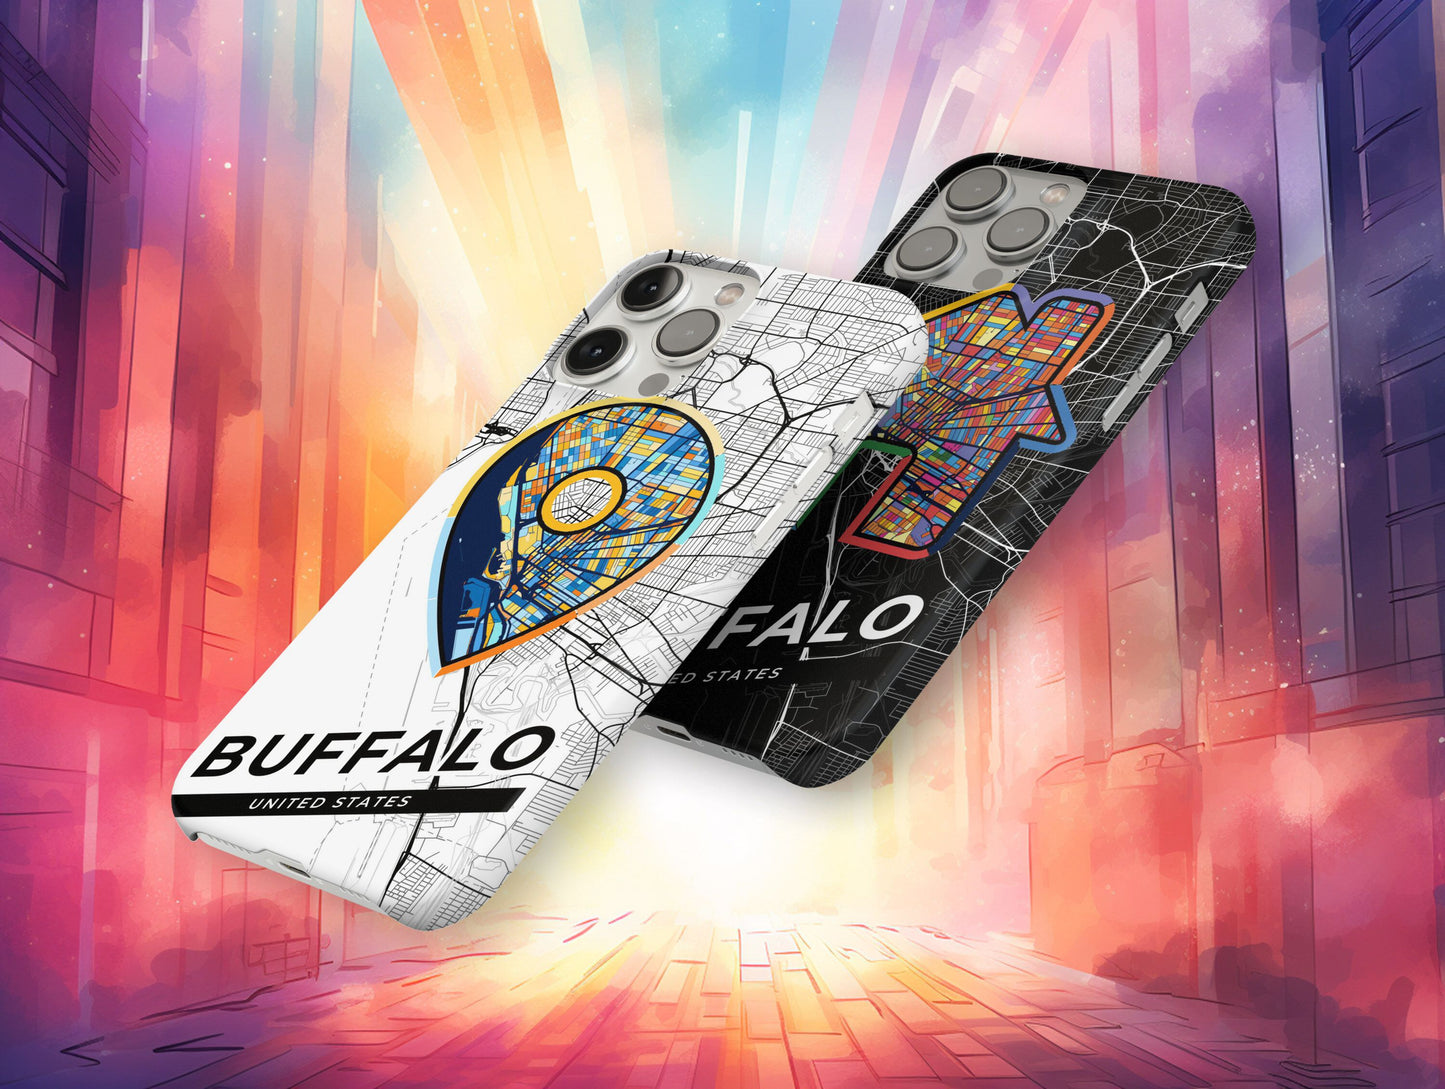 Buffalo New York slim phone case with colorful icon. Birthday, wedding or housewarming gift. Couple match cases.